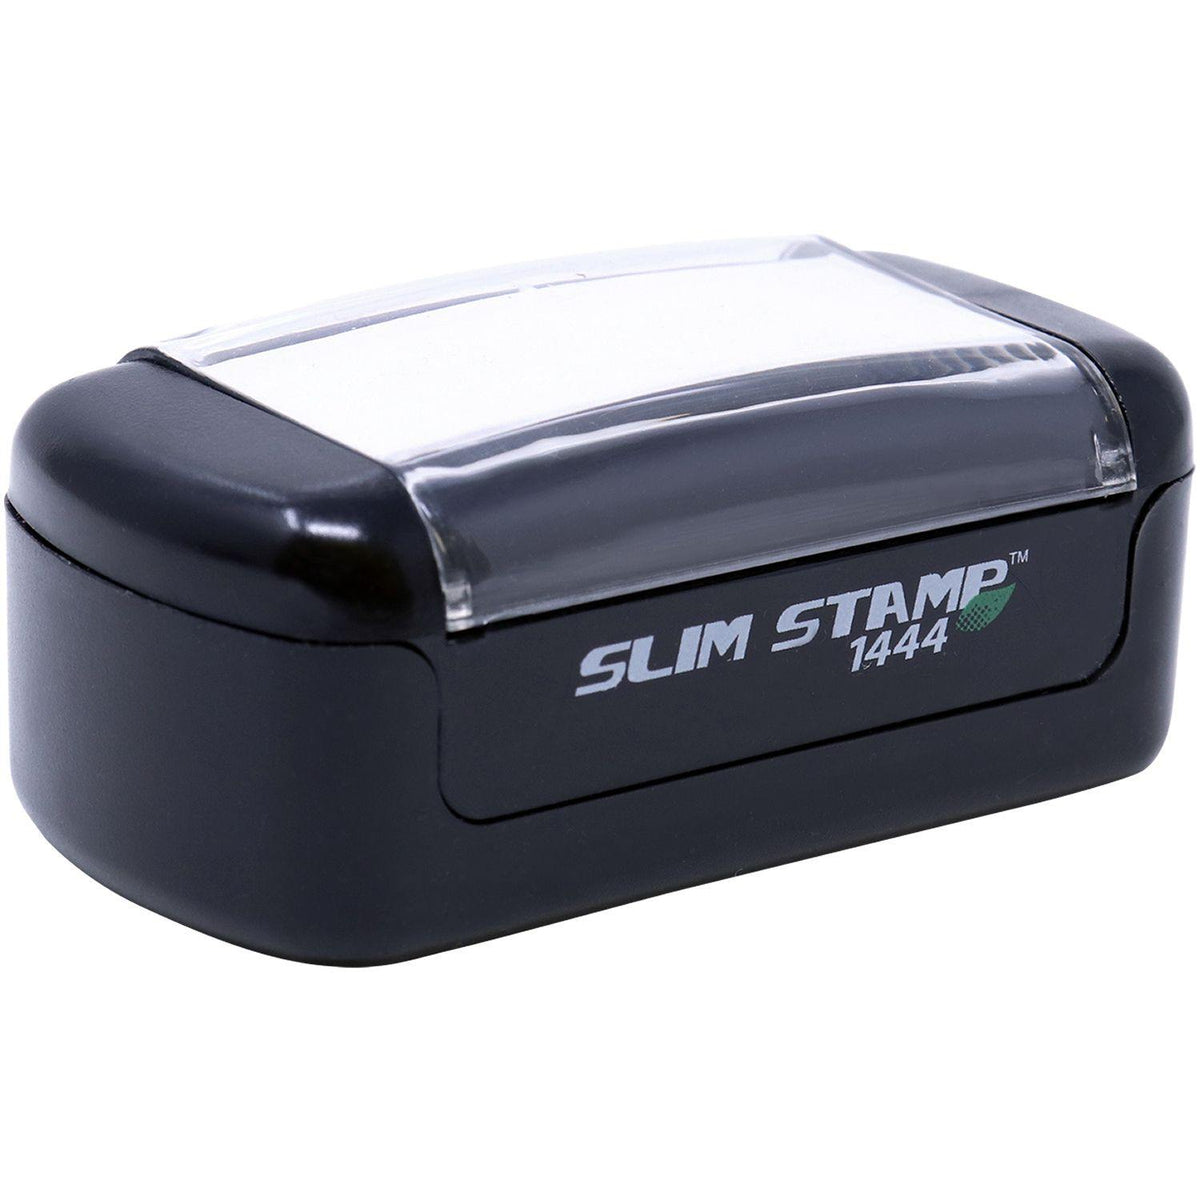 Alt View of Slim Pre Inked Two Thumbs Up Stamp Mount Angle